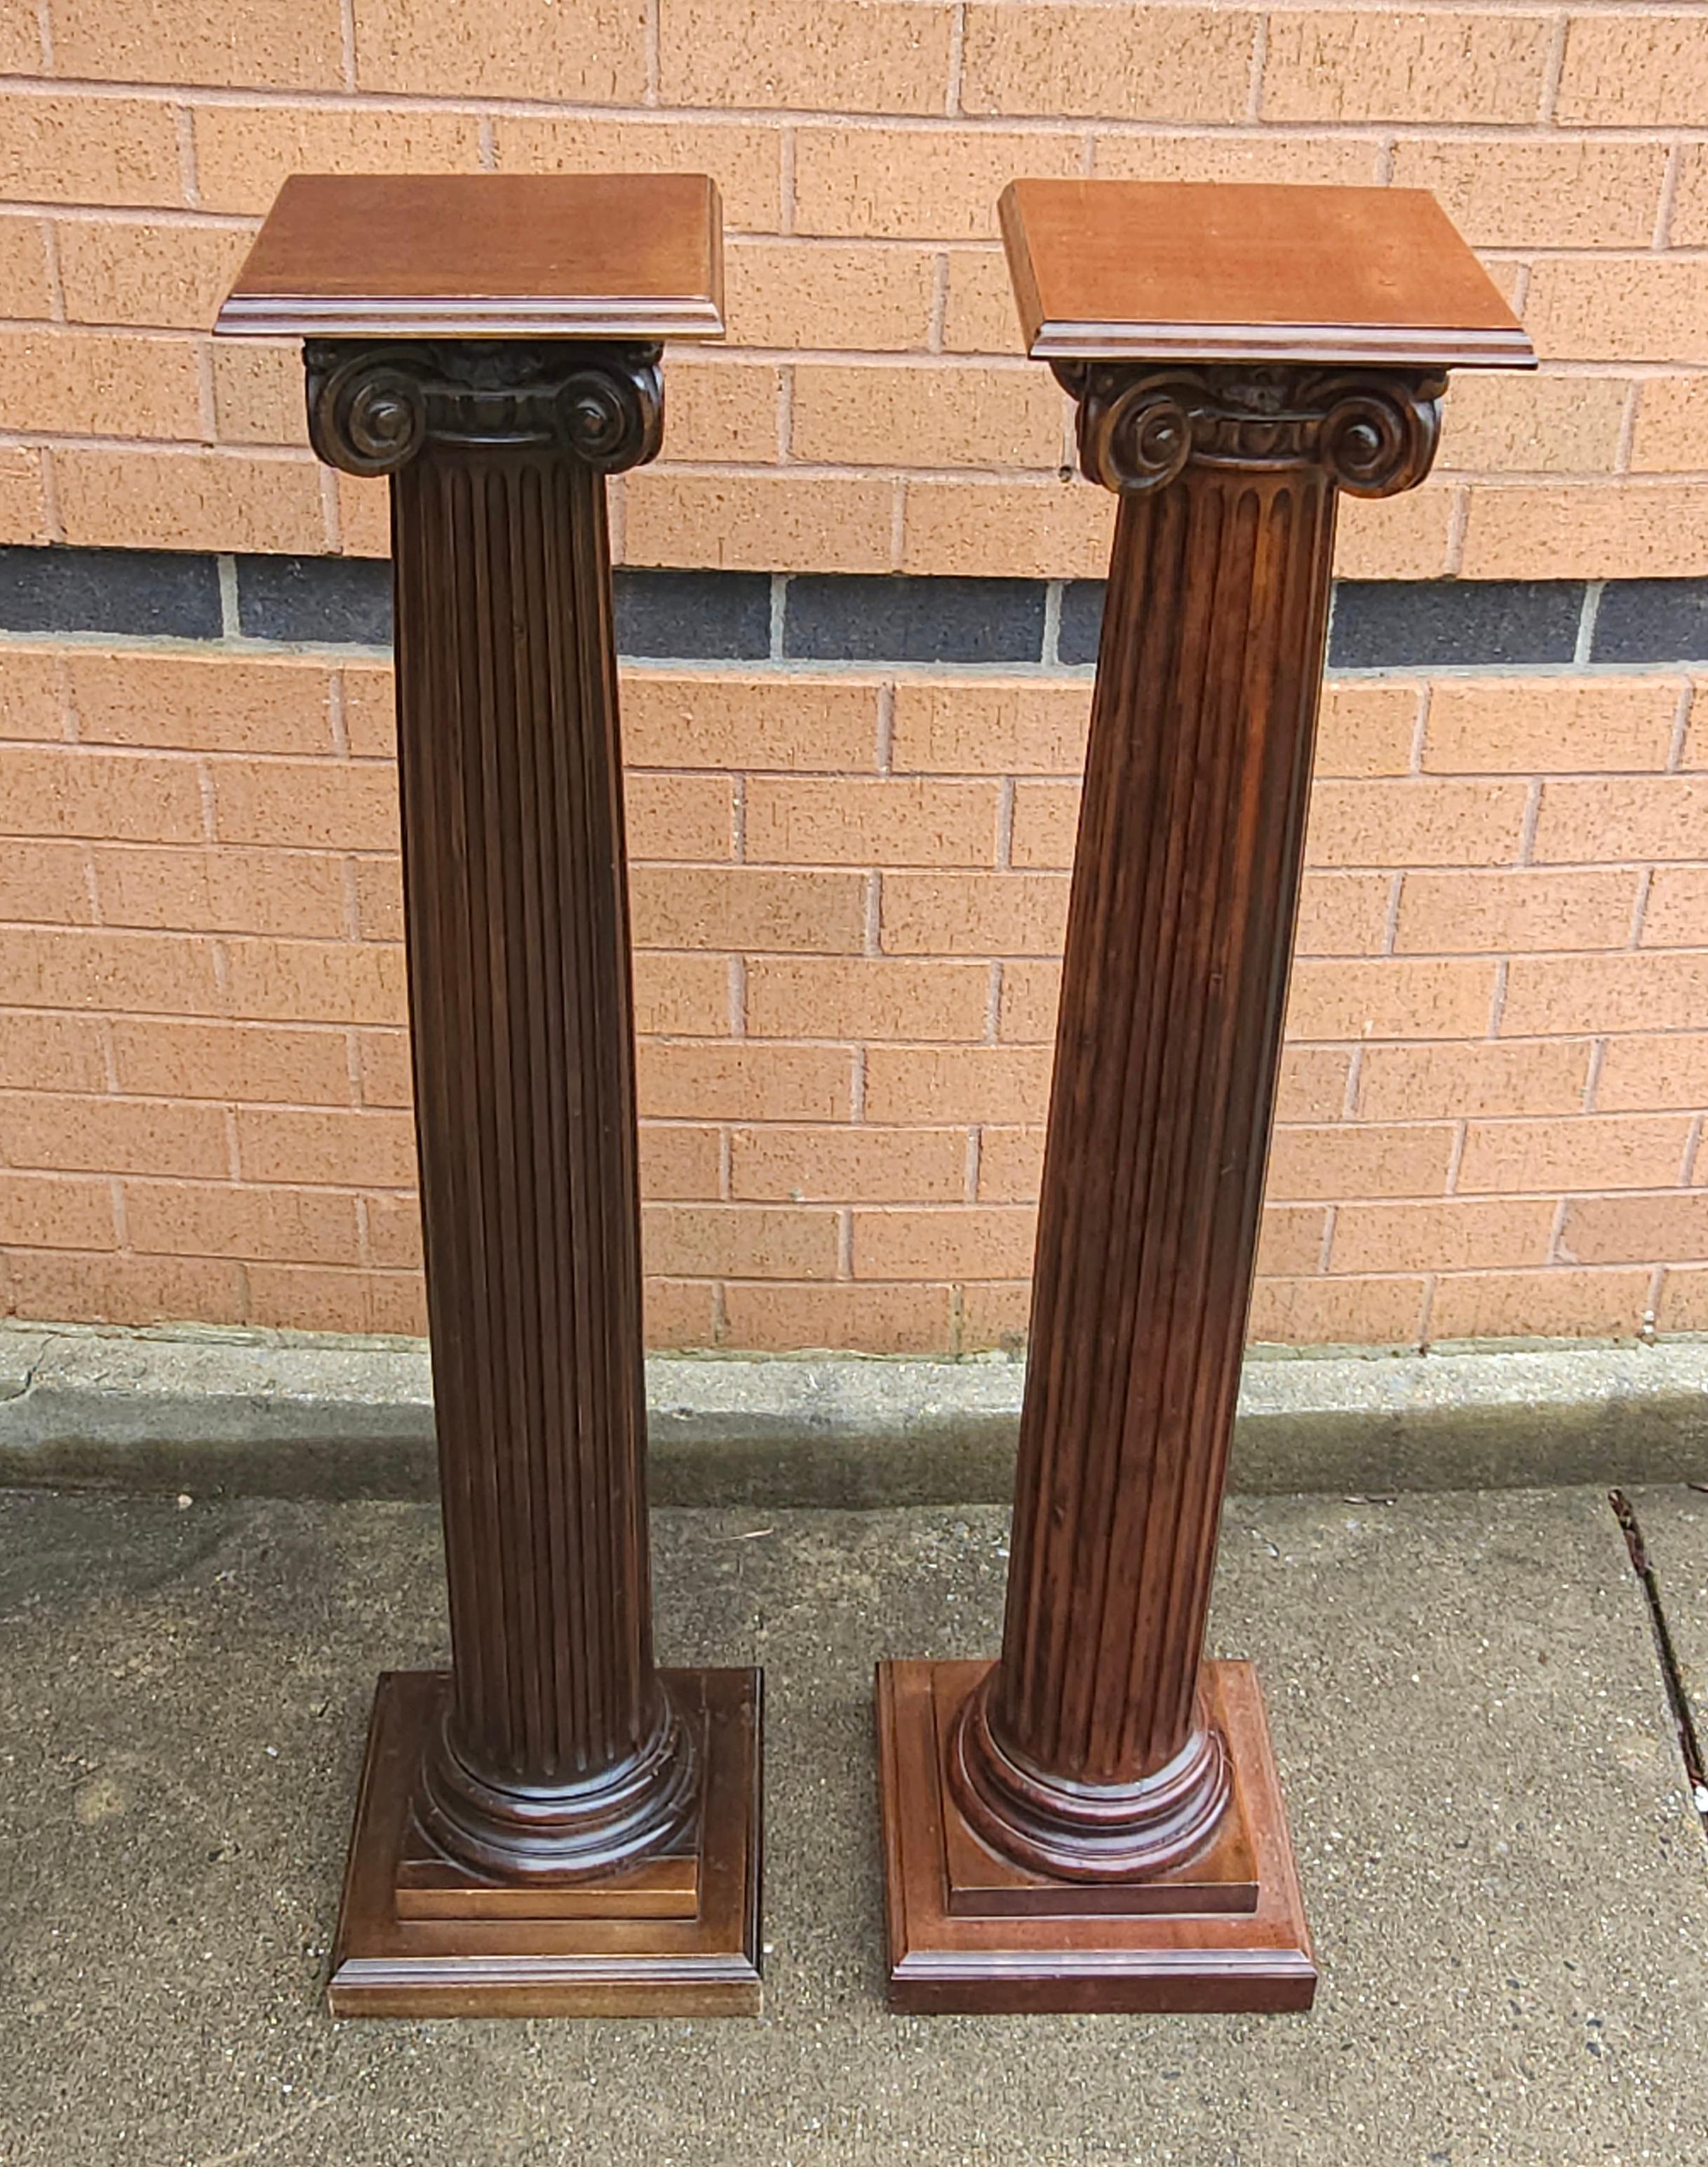 Pair Of Mahogany Ionic Order Style Column-Form Pedestals In Good Condition For Sale In Germantown, MD